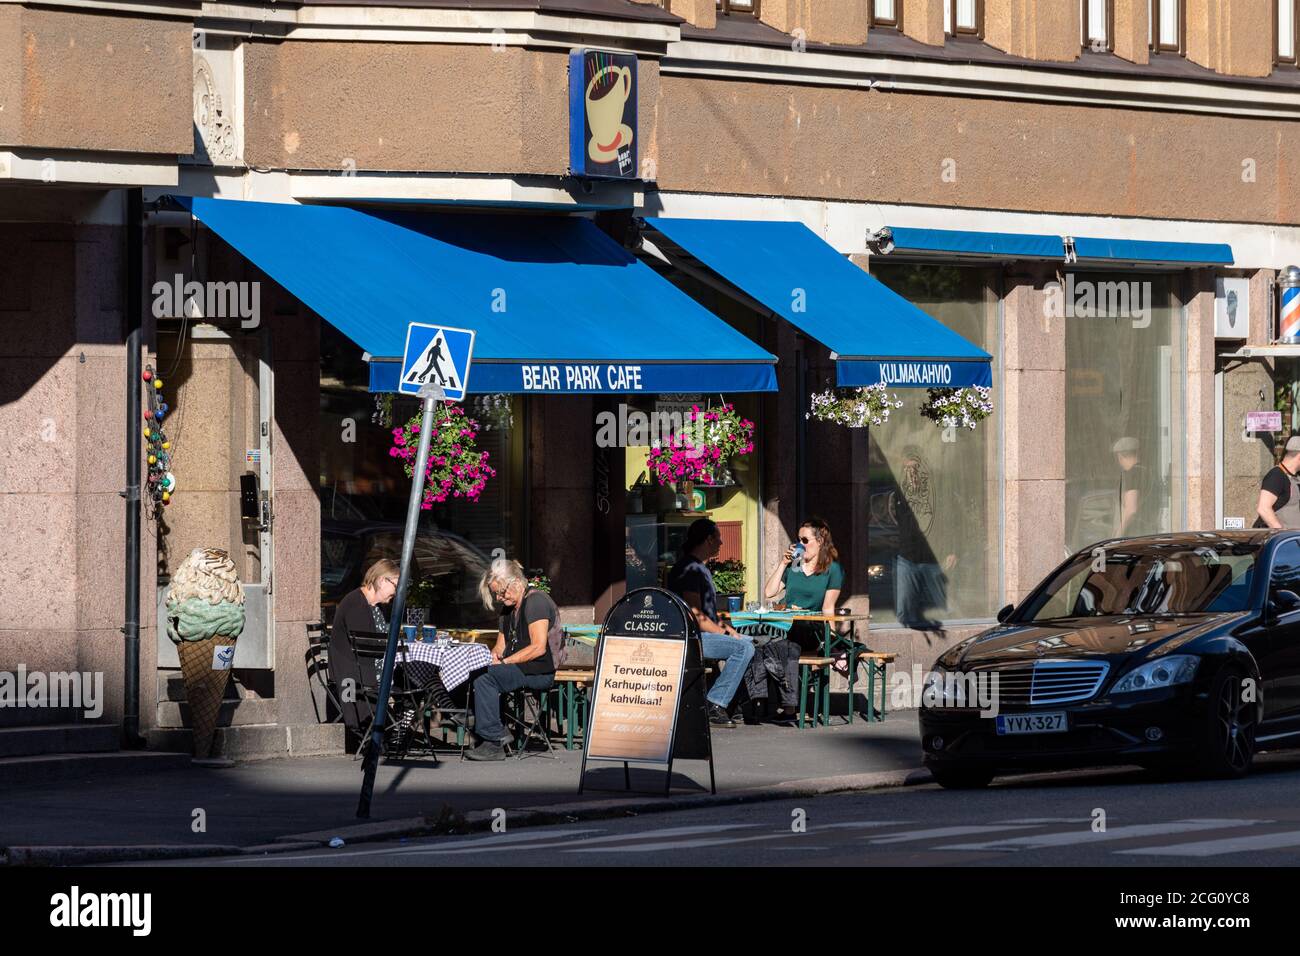 Bear Park Cafe, quirky little gay café by Karhupuisto in Kallio district of Helsinki, Finland Stock Photo